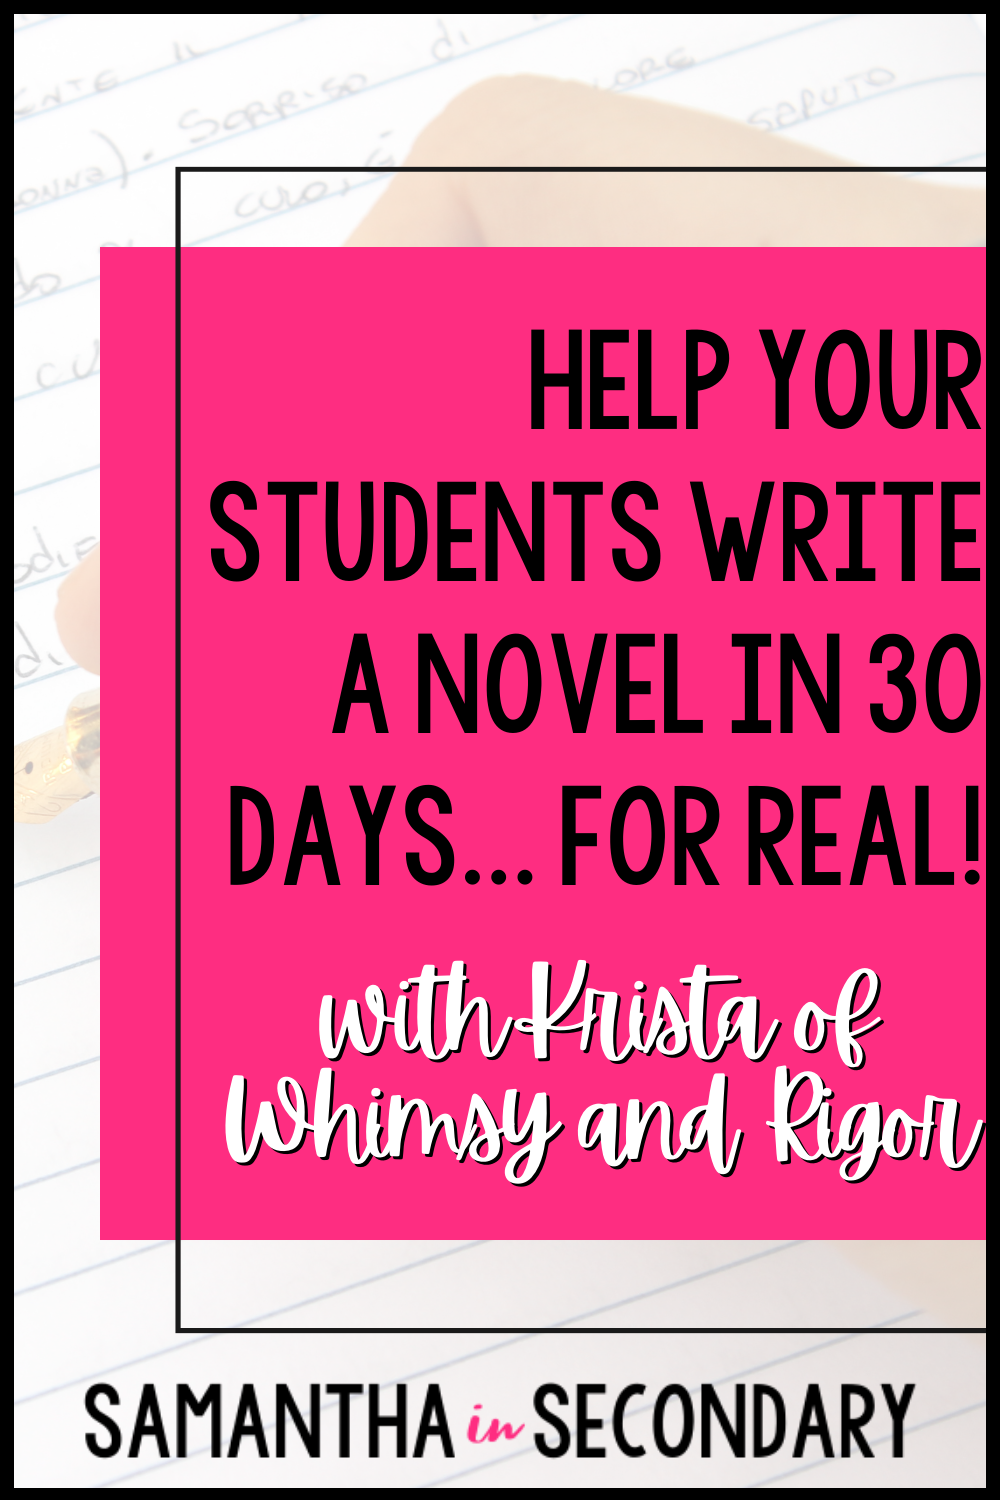 write a novel in 30 days worksheets